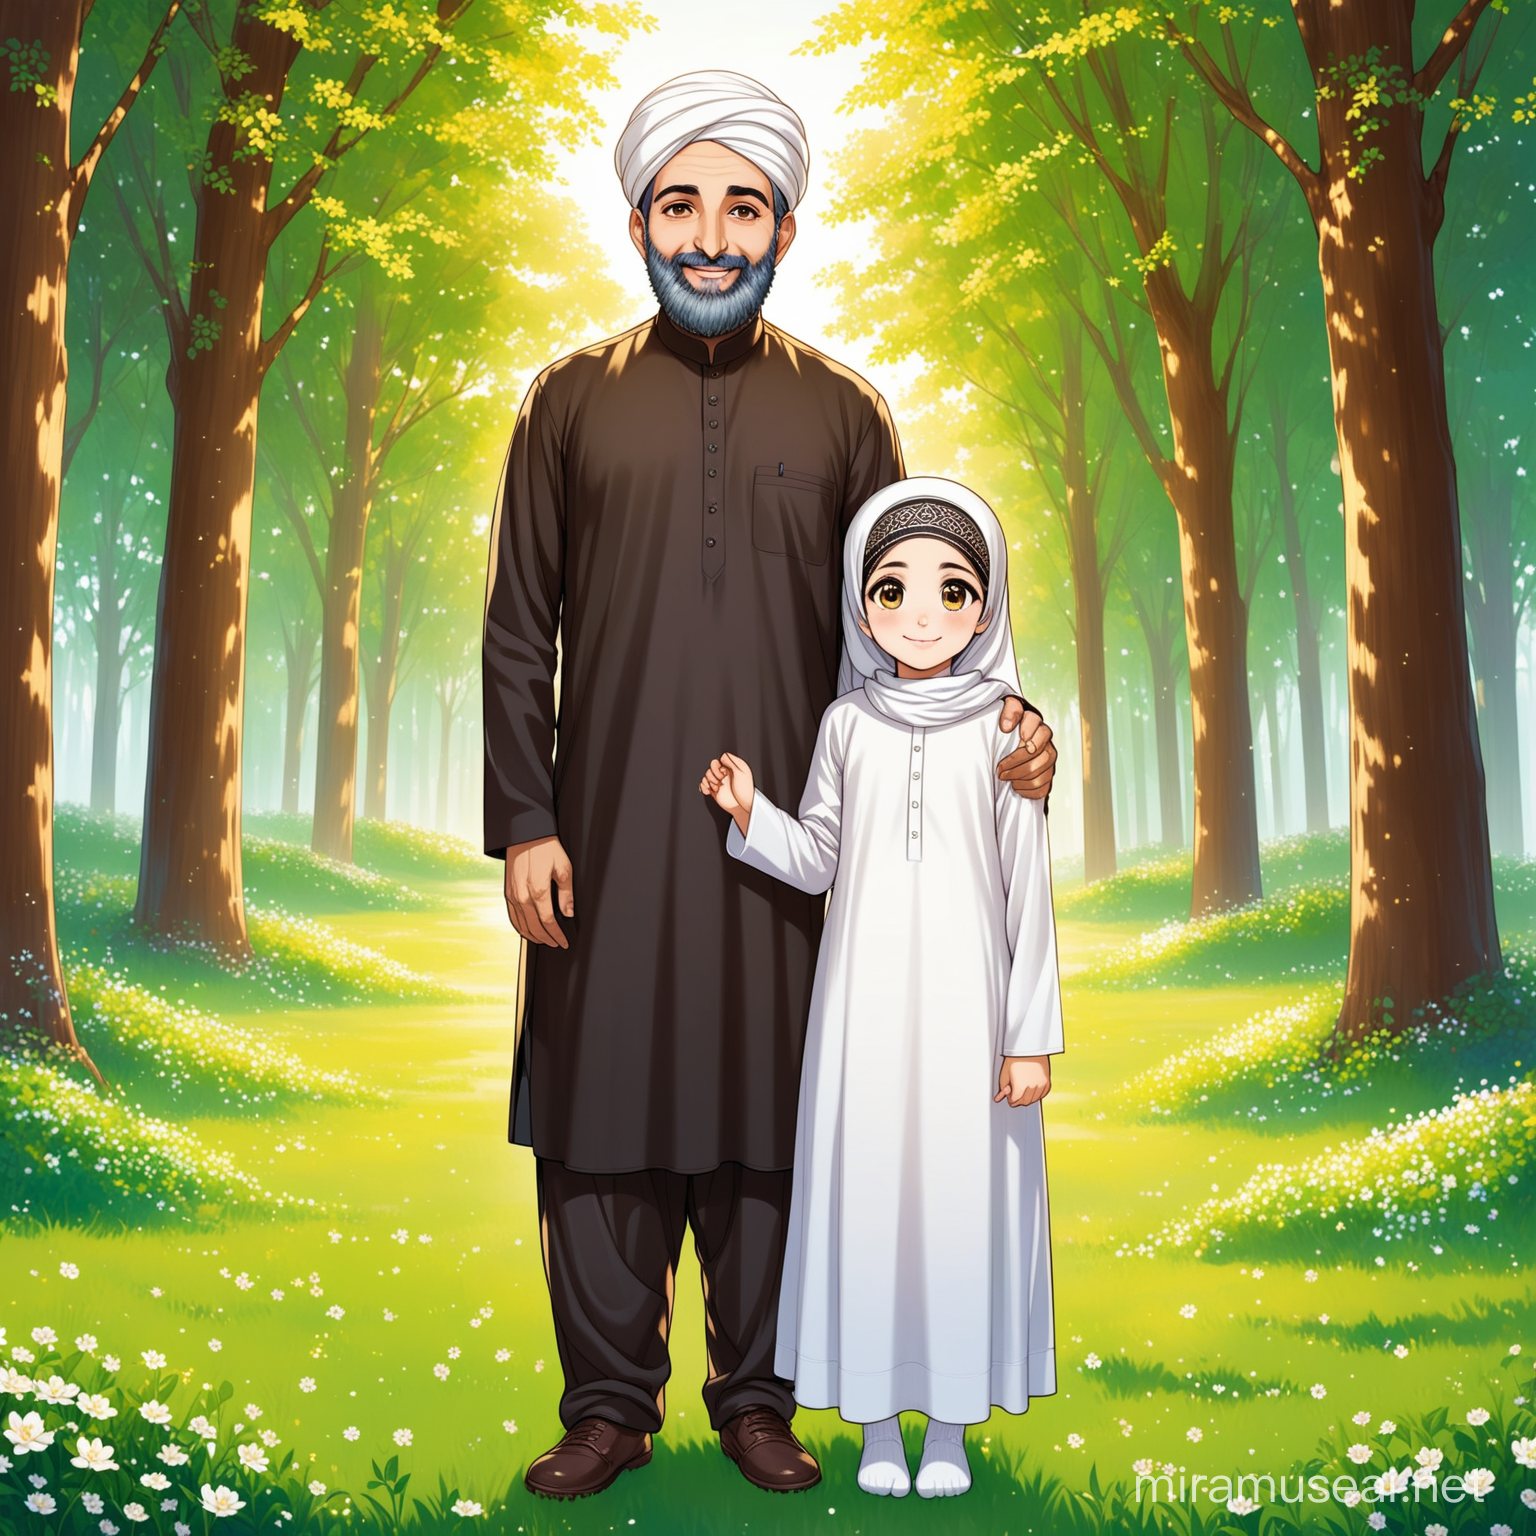 Persian Father and Daughter Enjoying Nature Stroll Heartwarming Family Bonding in a Forest Setting